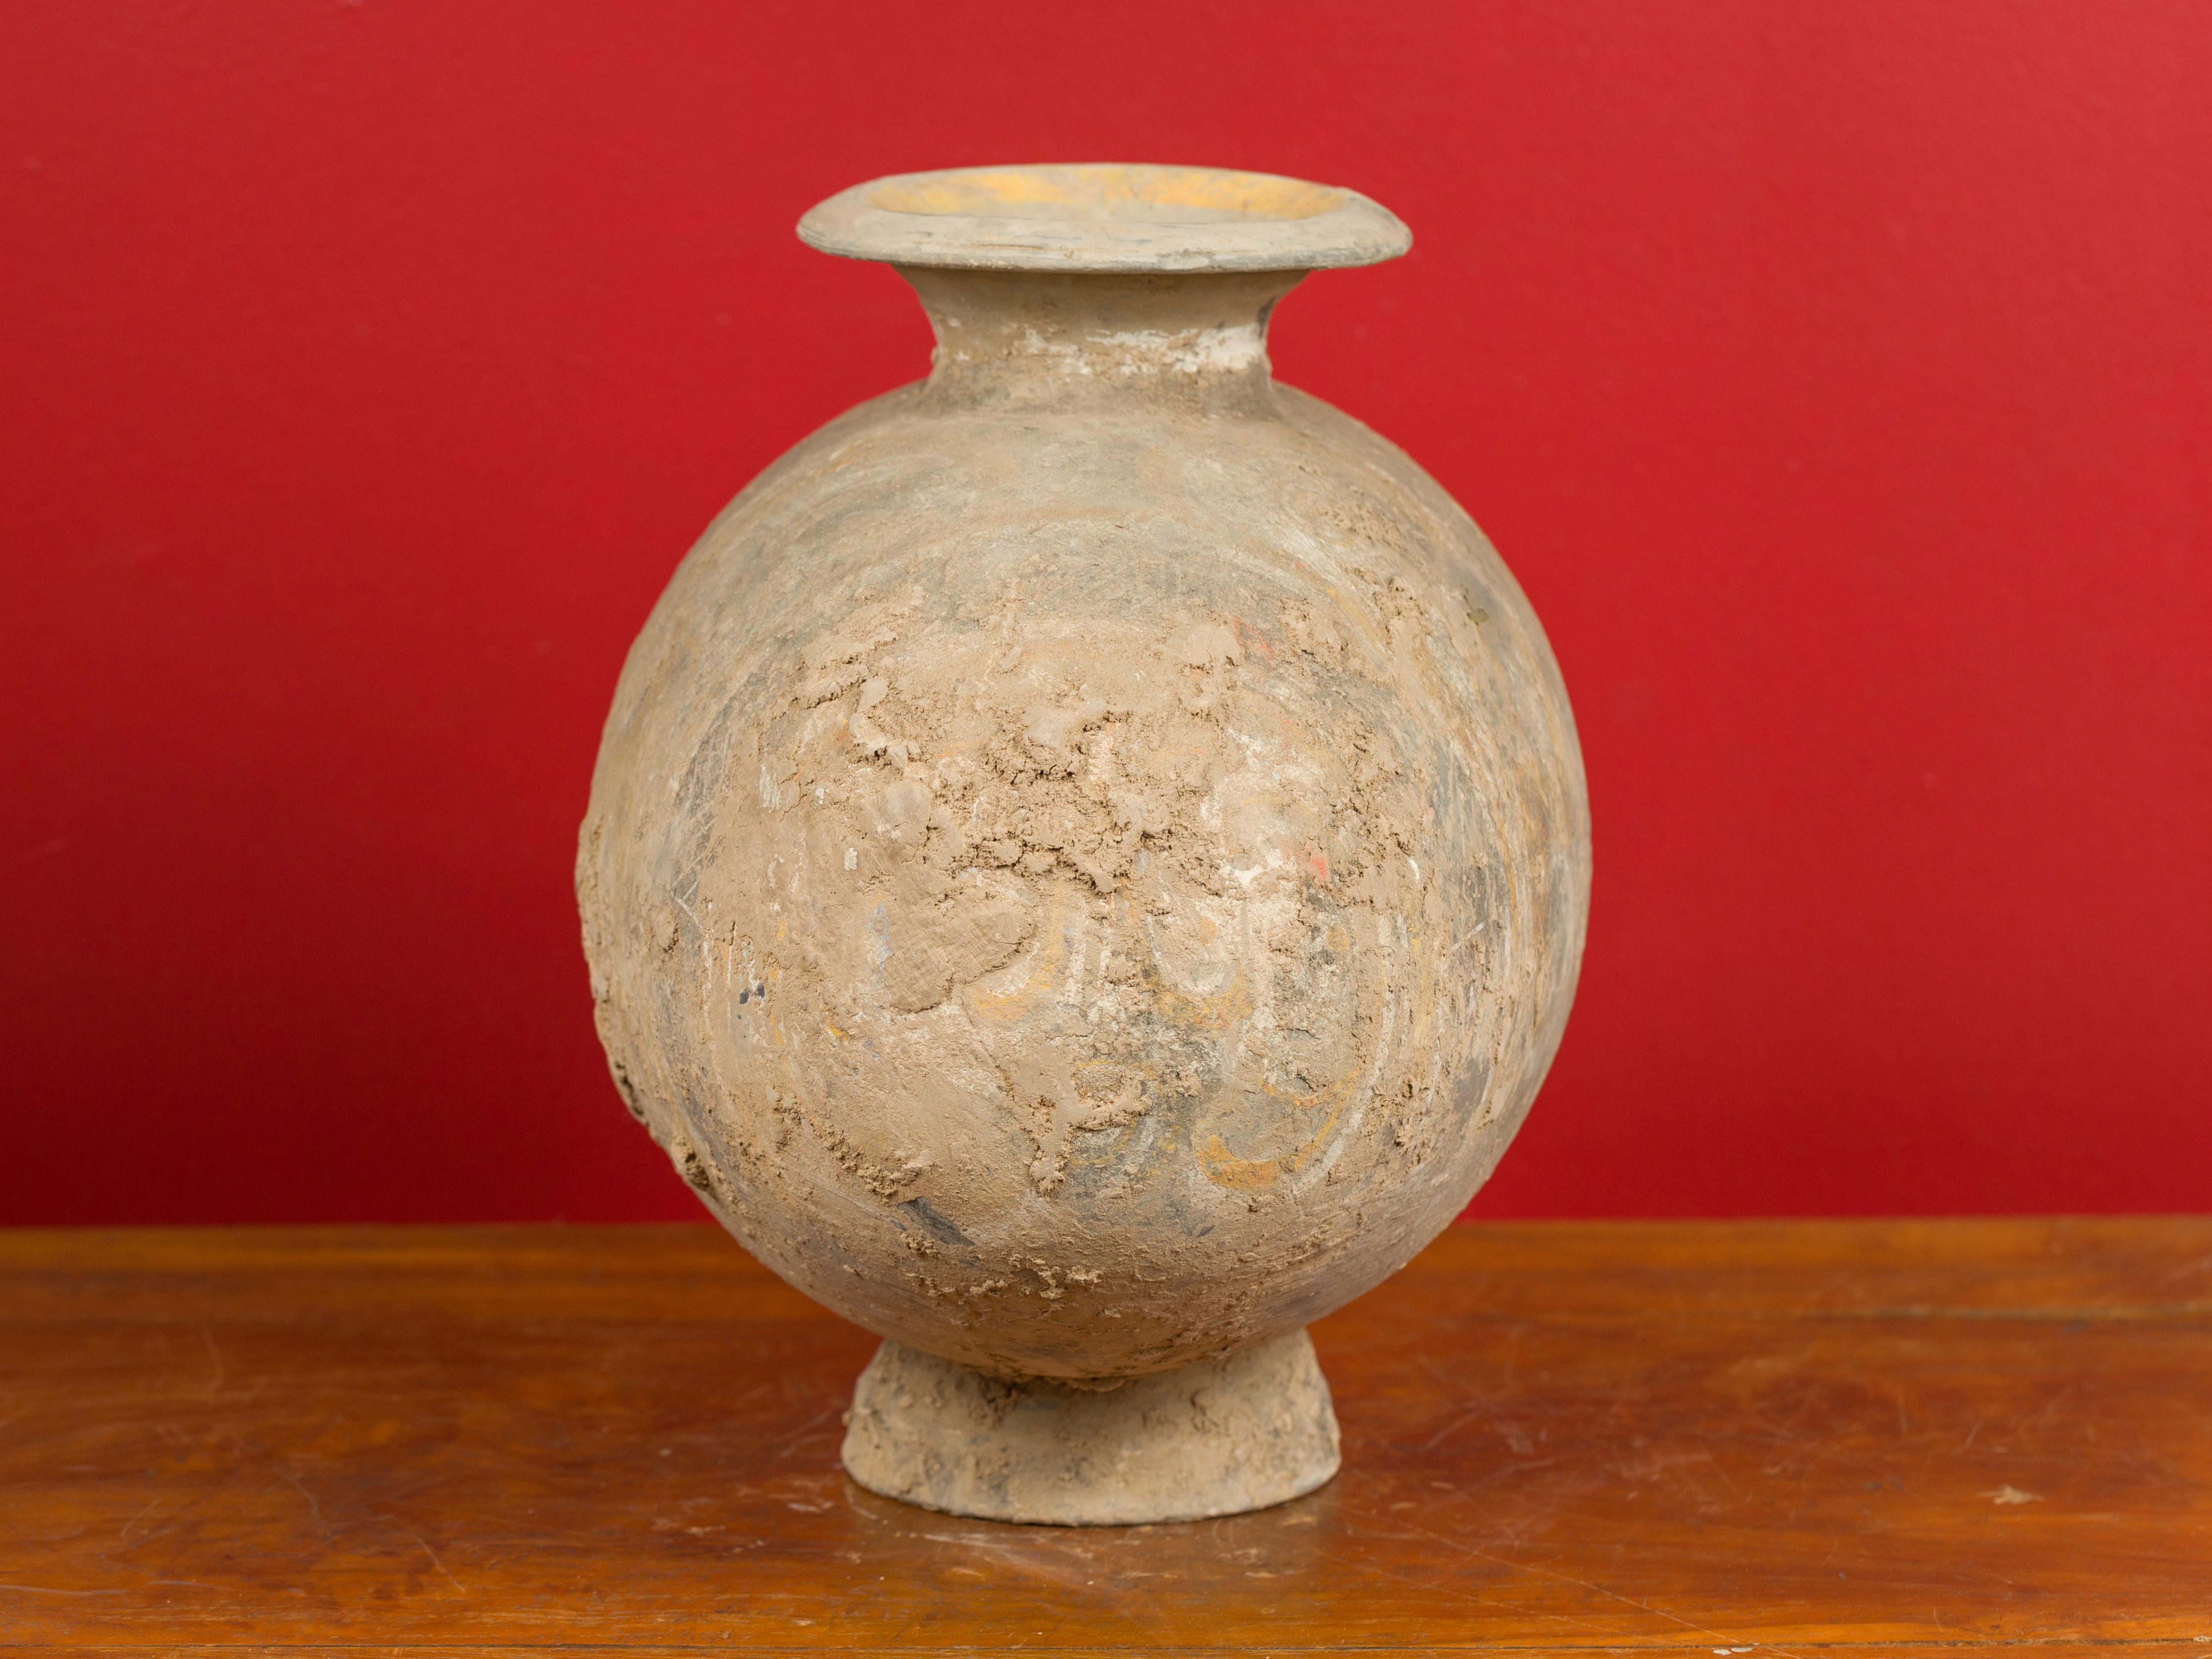 206 BC-200 AD Han Dynasty Antique Terracotta Silk Cocoon Jar with Original Paint 3